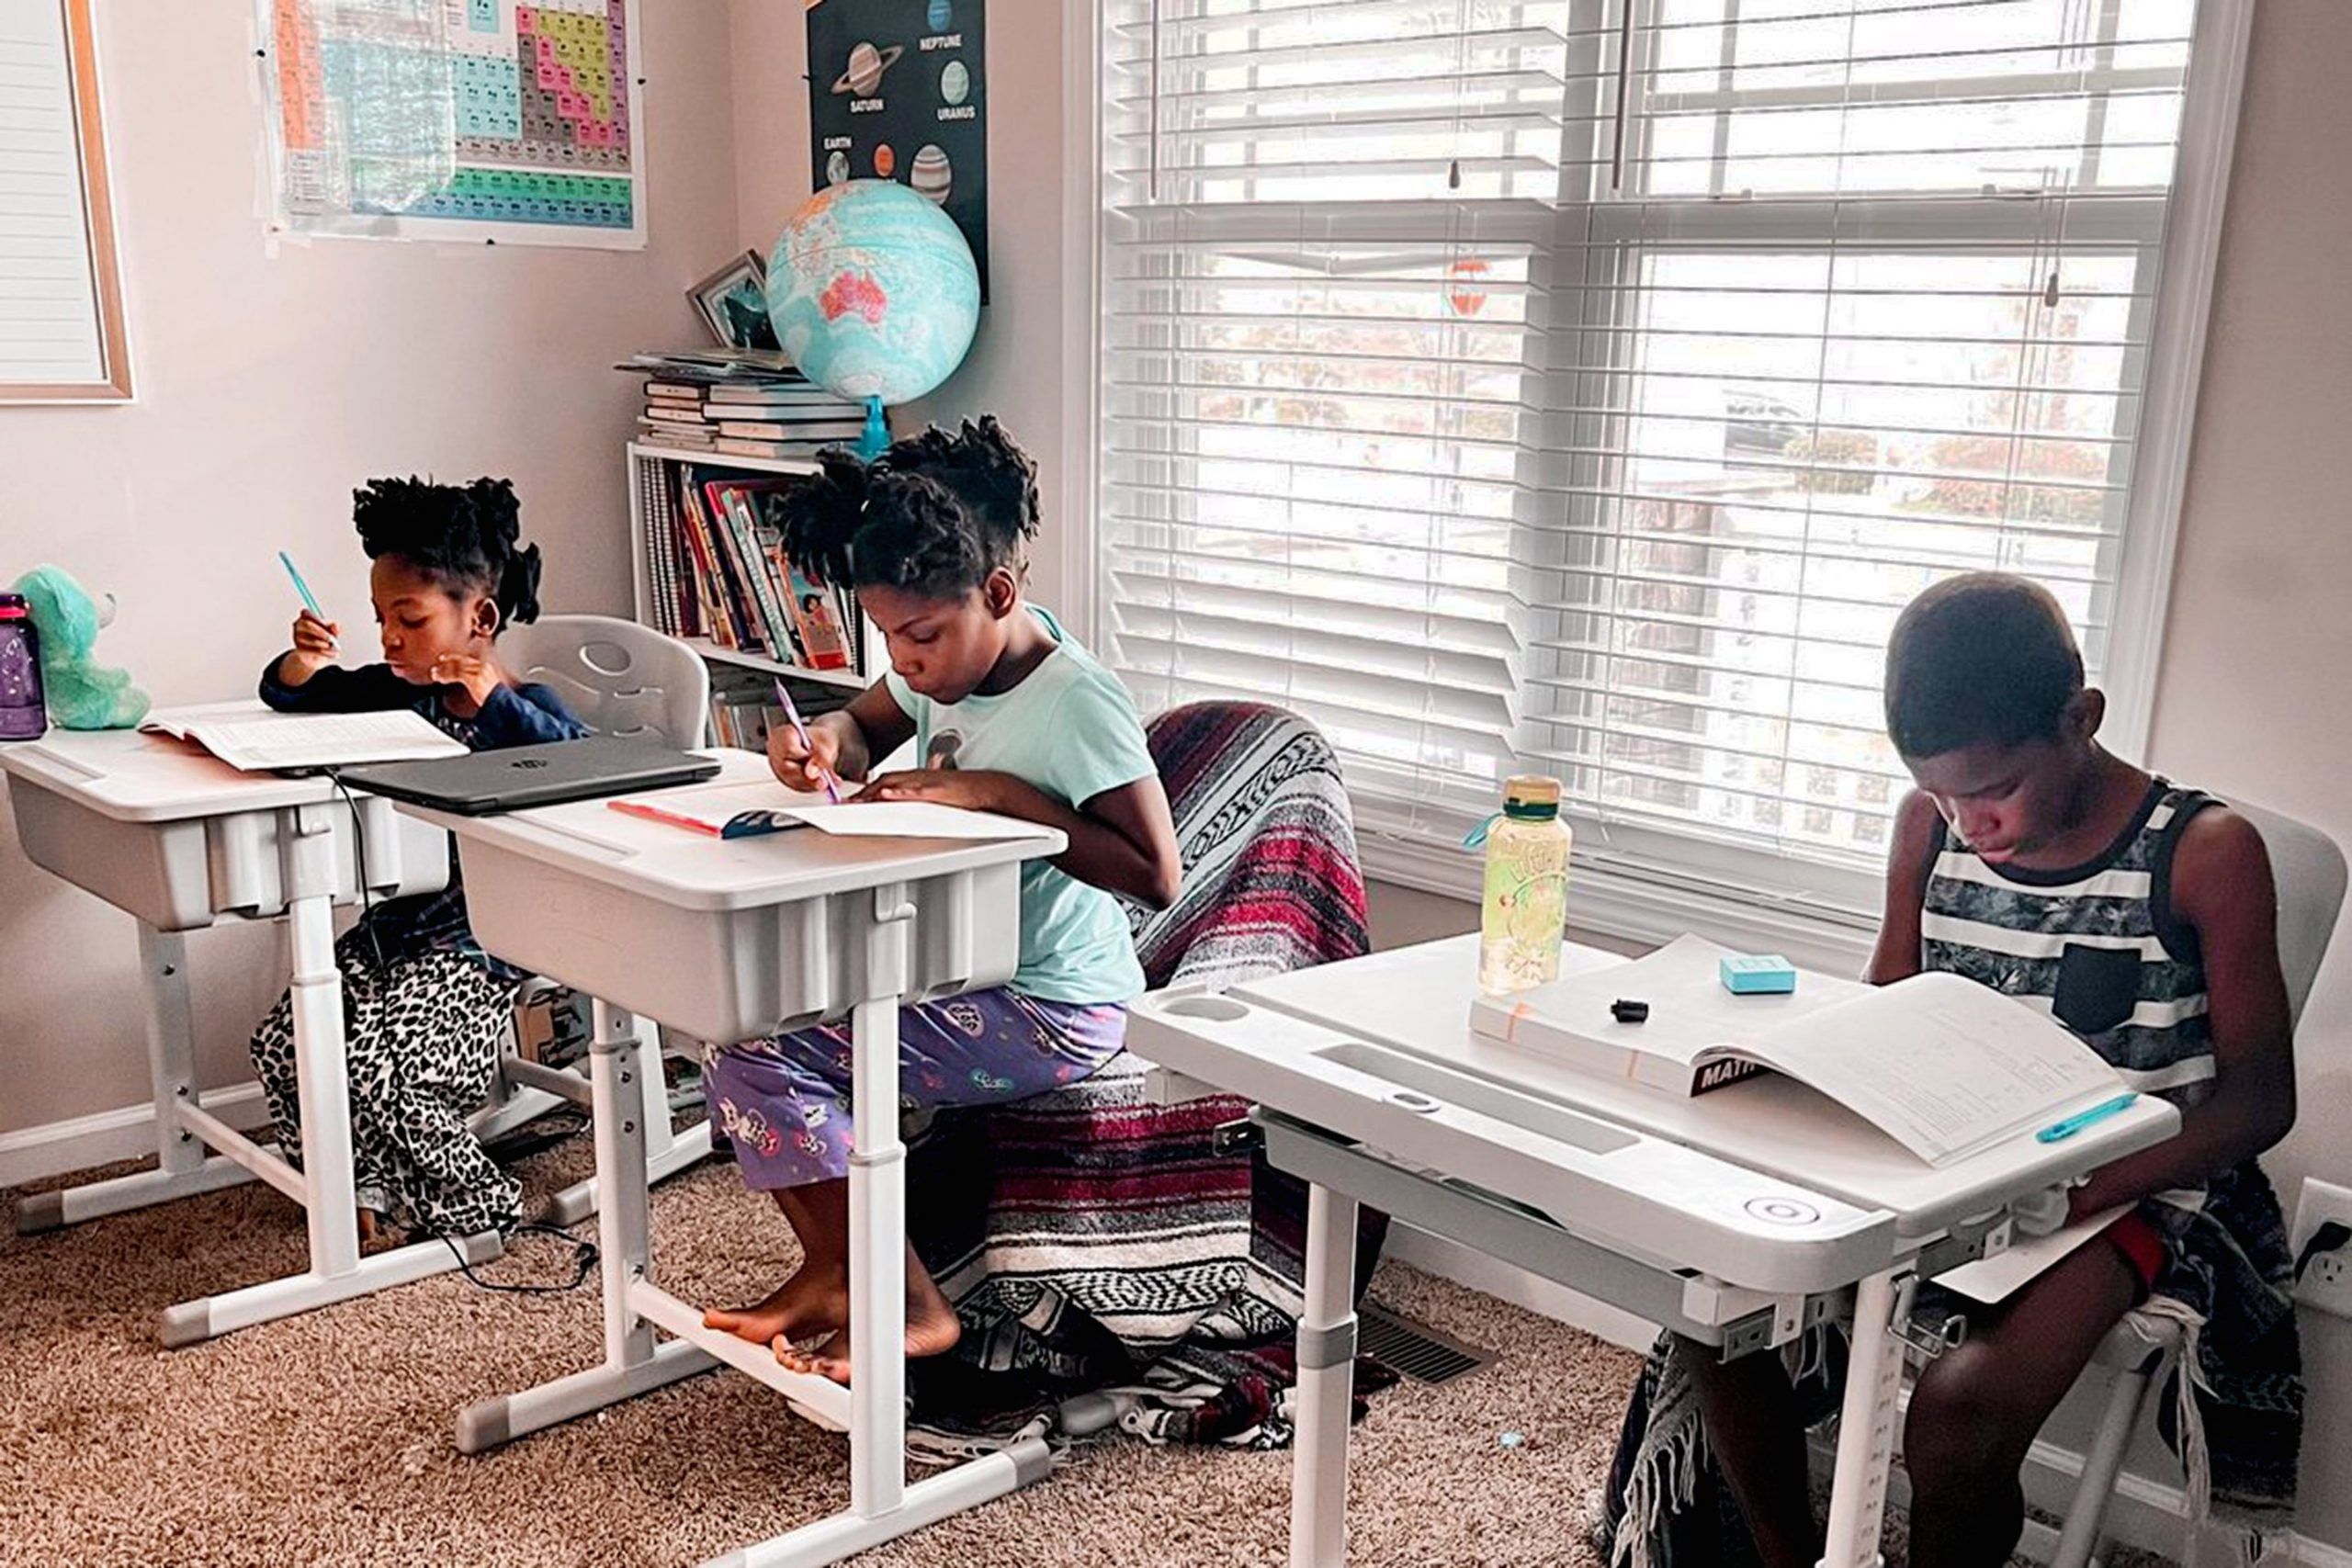 Many parents in the U.S. are sticking to homeschooling their children despite schools reopening